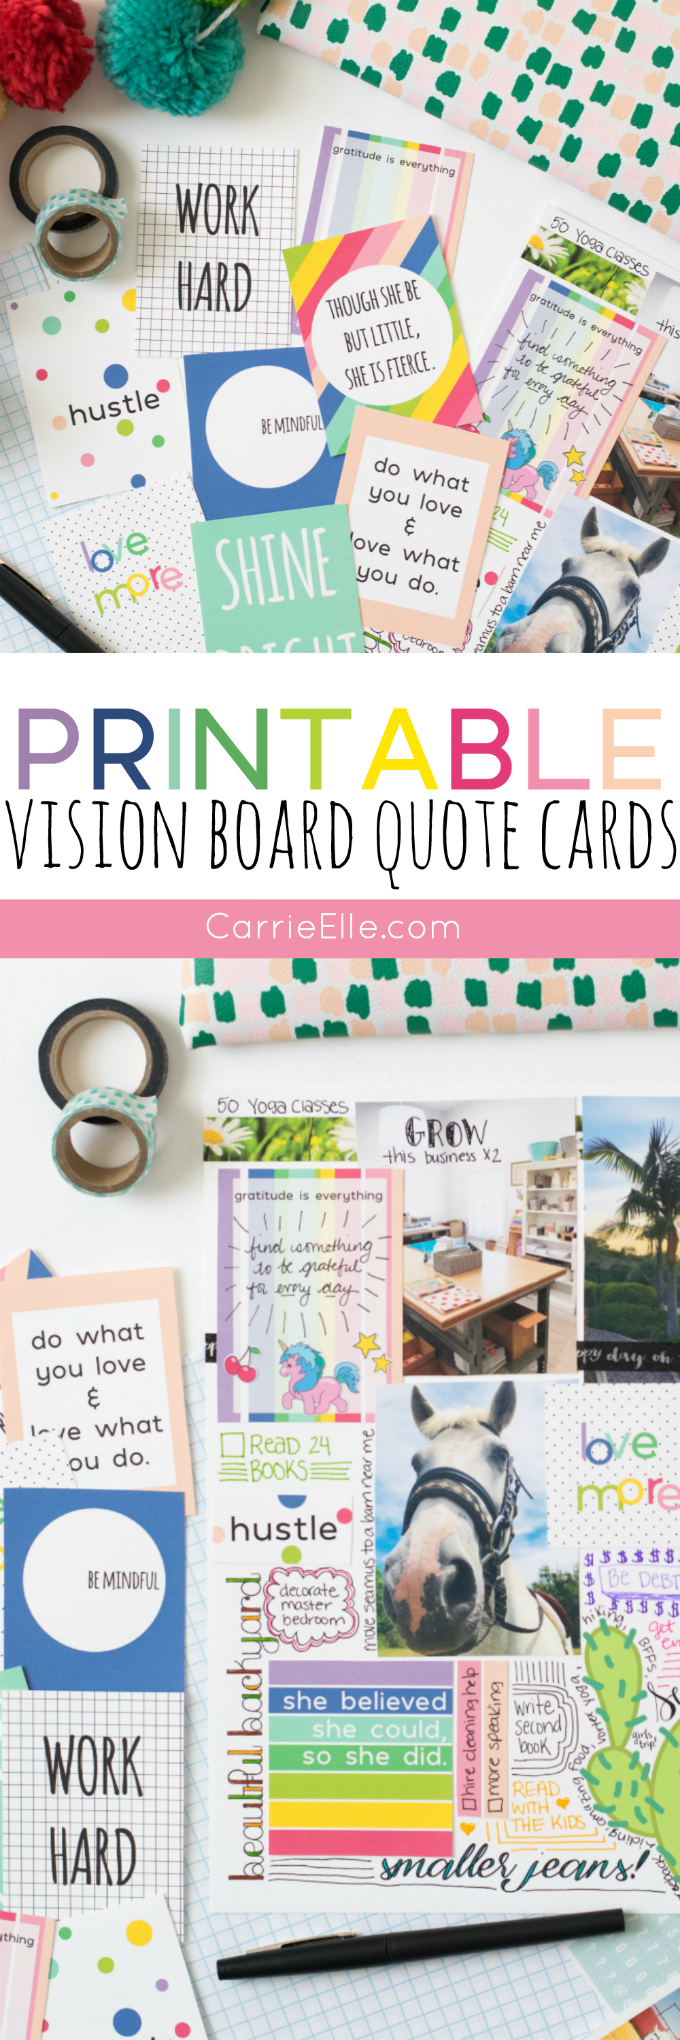 Vision Board Printable Quote Cards Carrie Elle